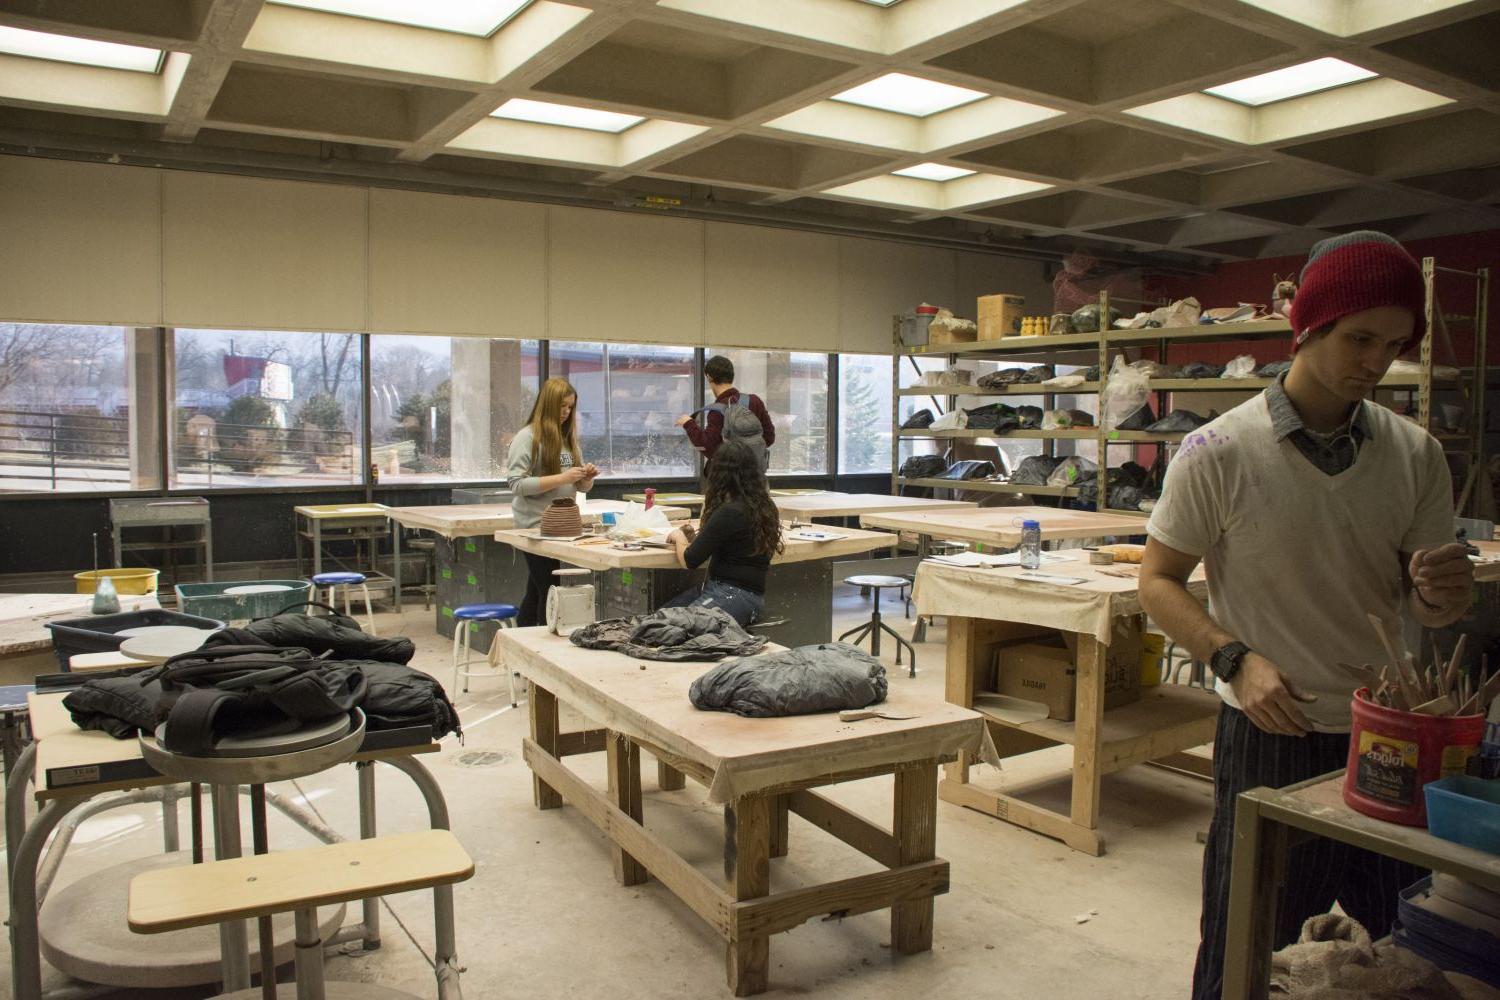 One of the six studio art classrooms in the H.F. Johnson Center of the Fine Arts.